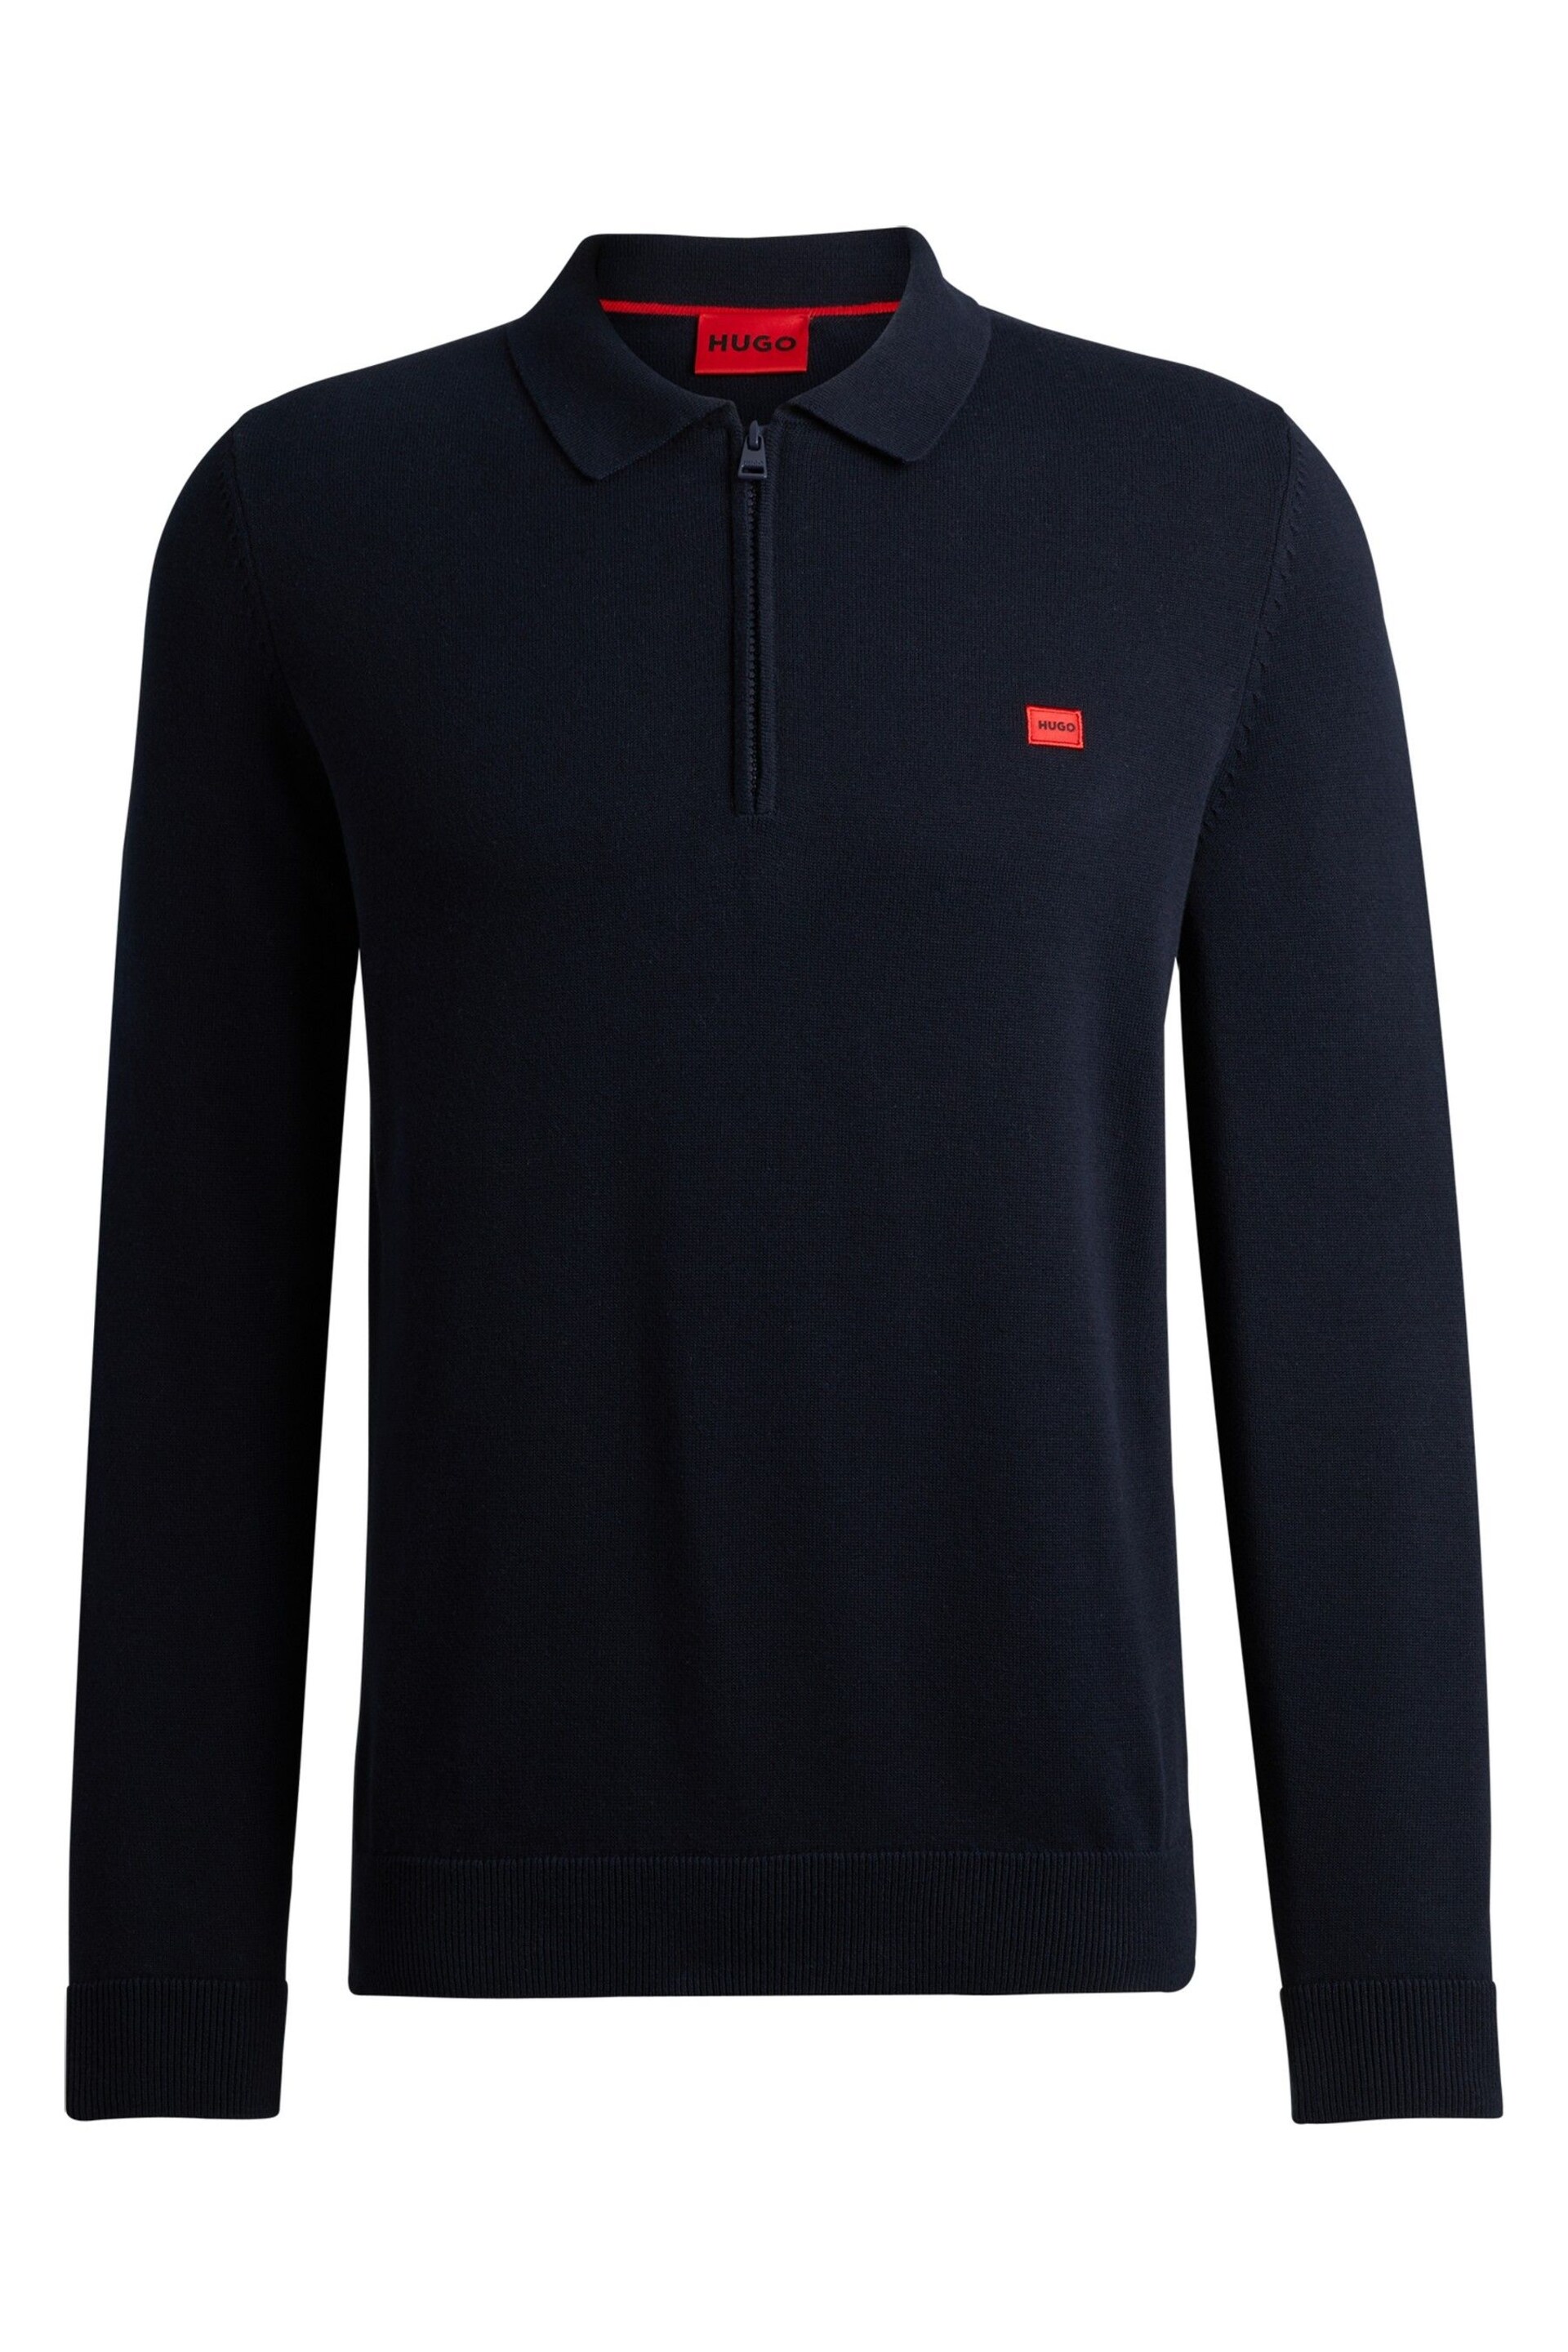 HUGO Blue Zip-Neck Cotton Sweater With Red Logo Label - Image 5 of 5